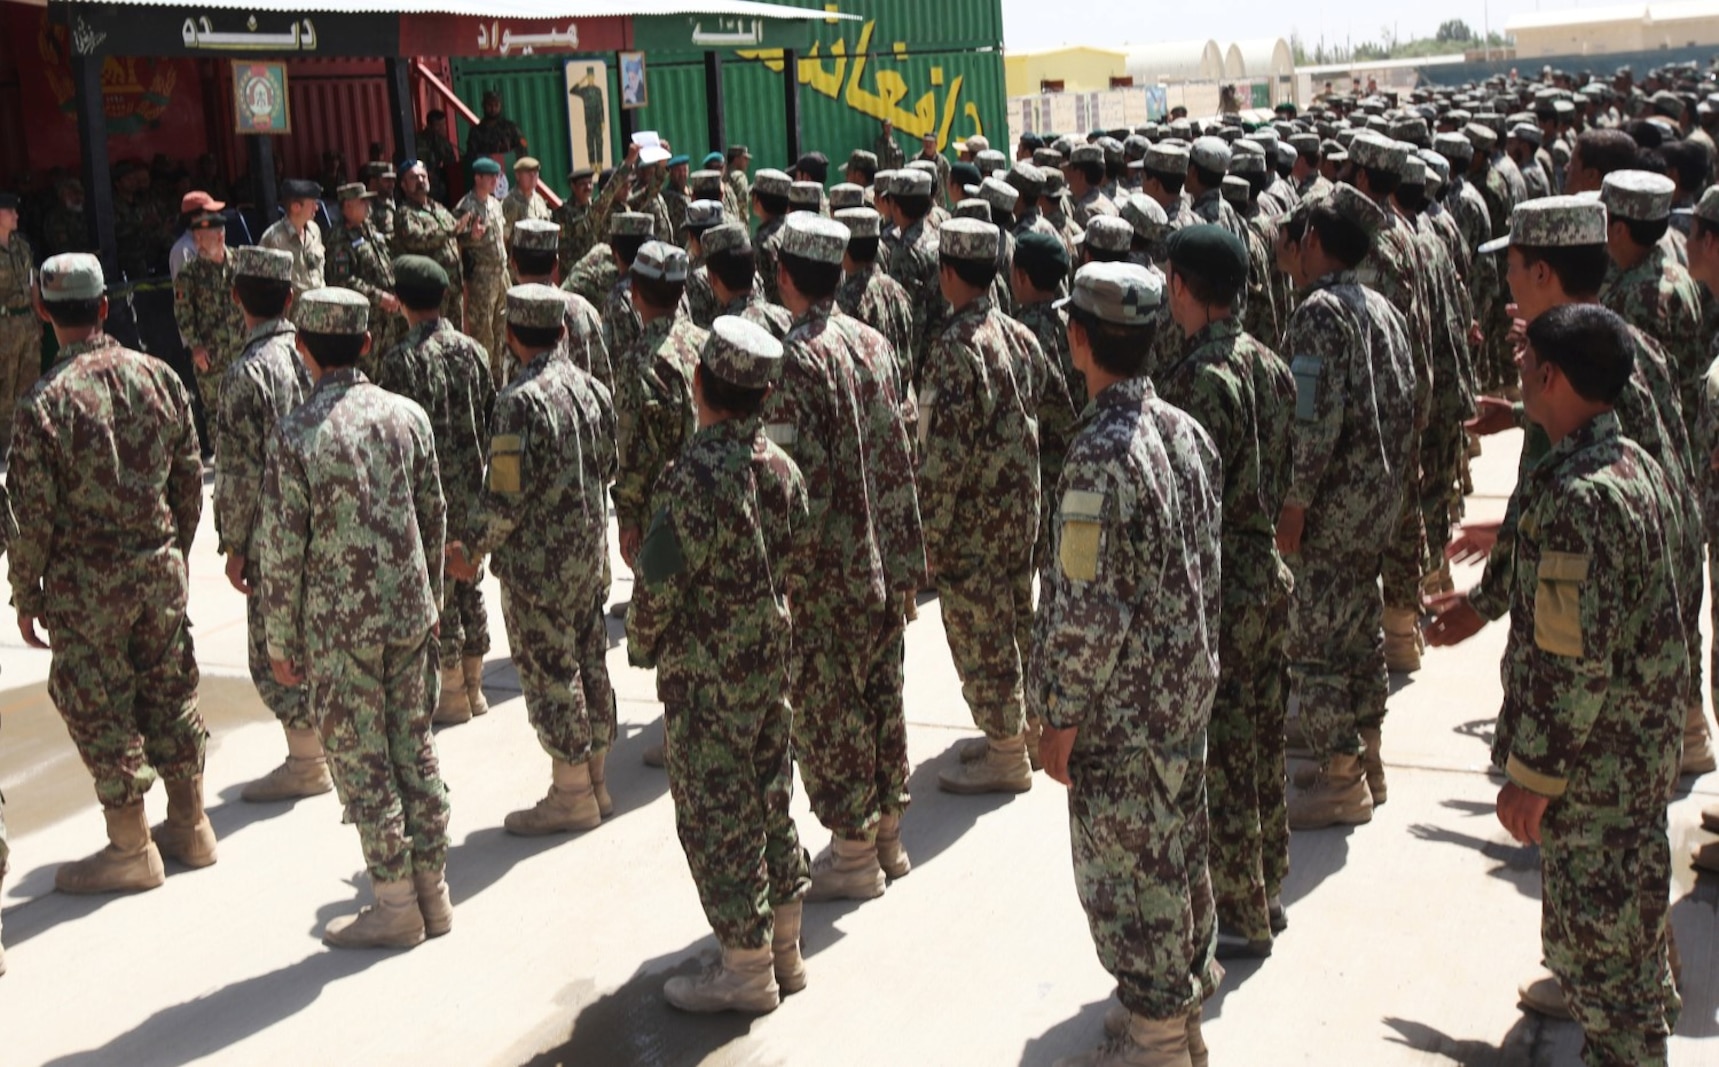 Afghan National Army soldiers with the 215th Corps stand in formation during their graduation ceremony aboard Camp Shorabak, Afghanistan, July 10, 2014. More than 650 soldiers graduated a completely Afghan-led, six-week combat training course, which consisted of 29 courses varying from hands-on weapons training to rifleman tactics. (U.S. Marine Corps photo by Cpl. Cody Haas/ Released)